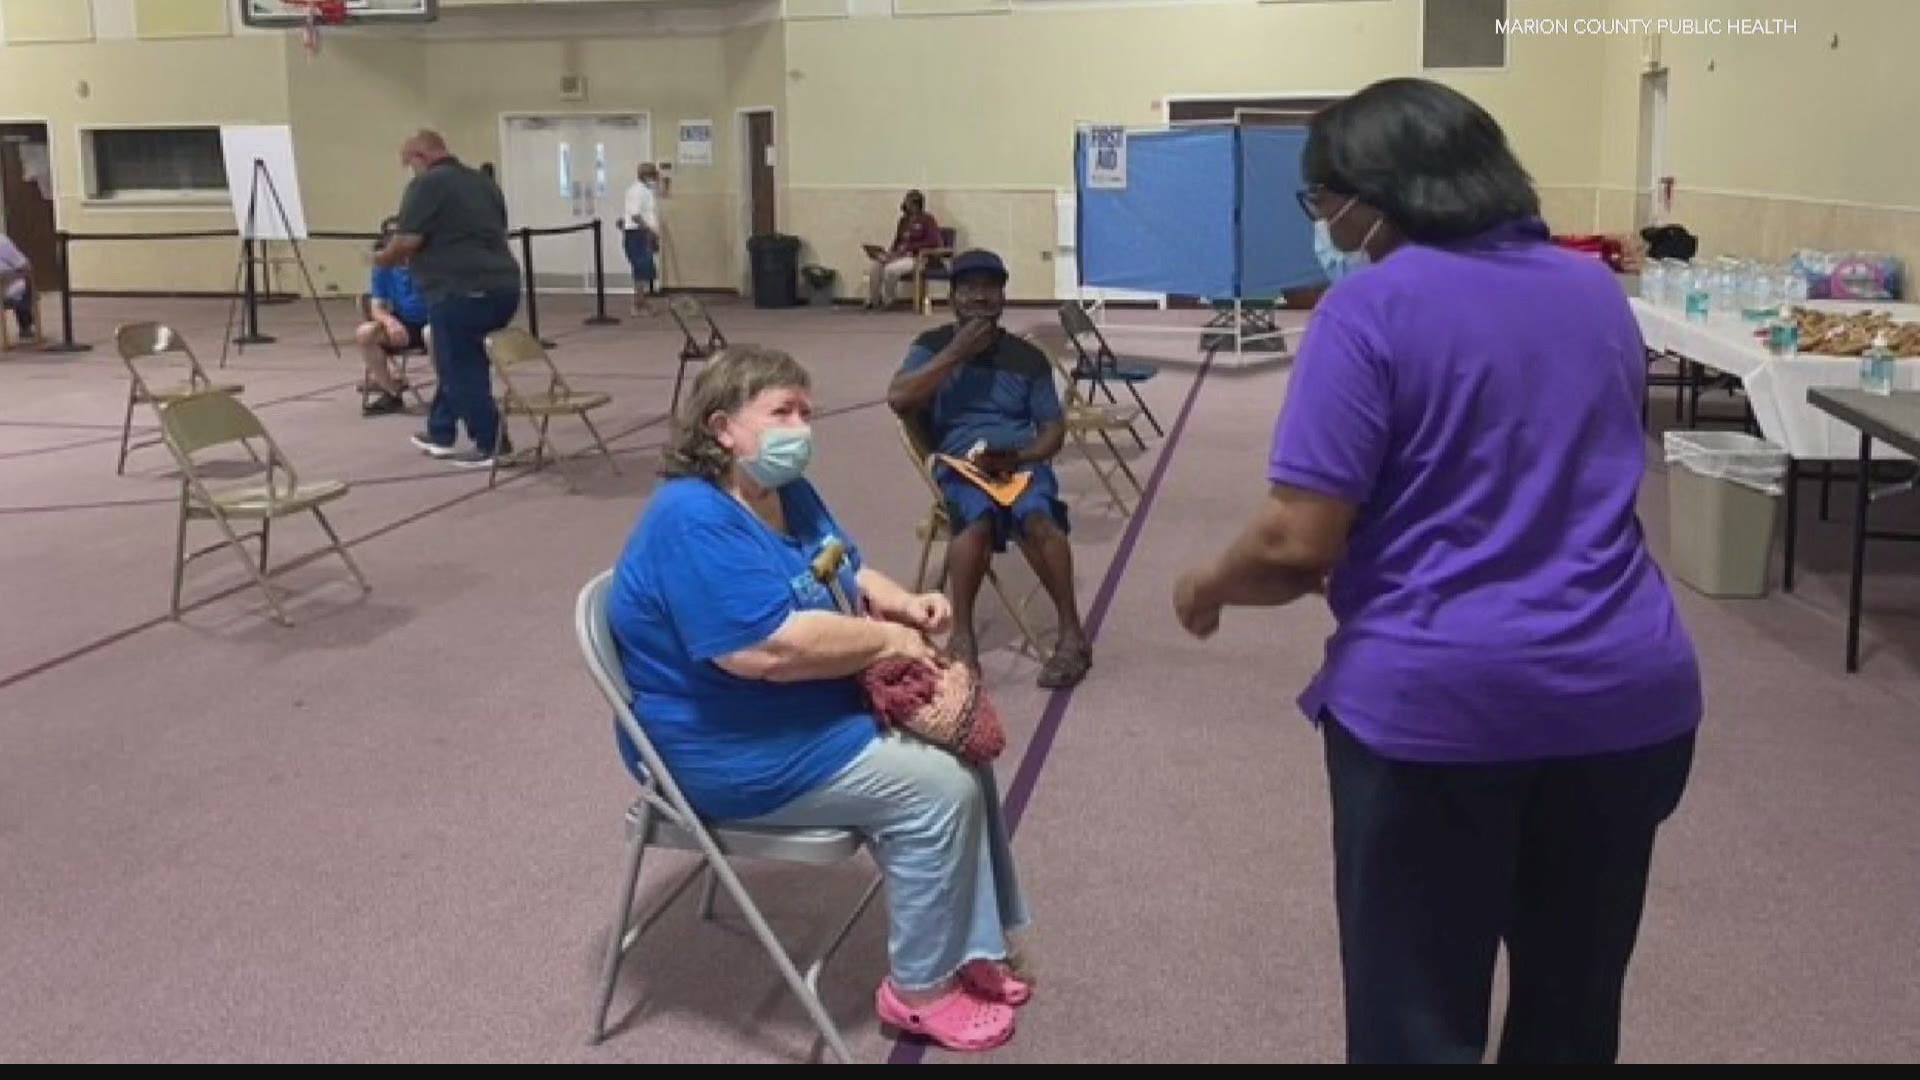 Health officials in Indianapolis want half of Marion County's population to be vaccinated against COVID-19 by July 1.